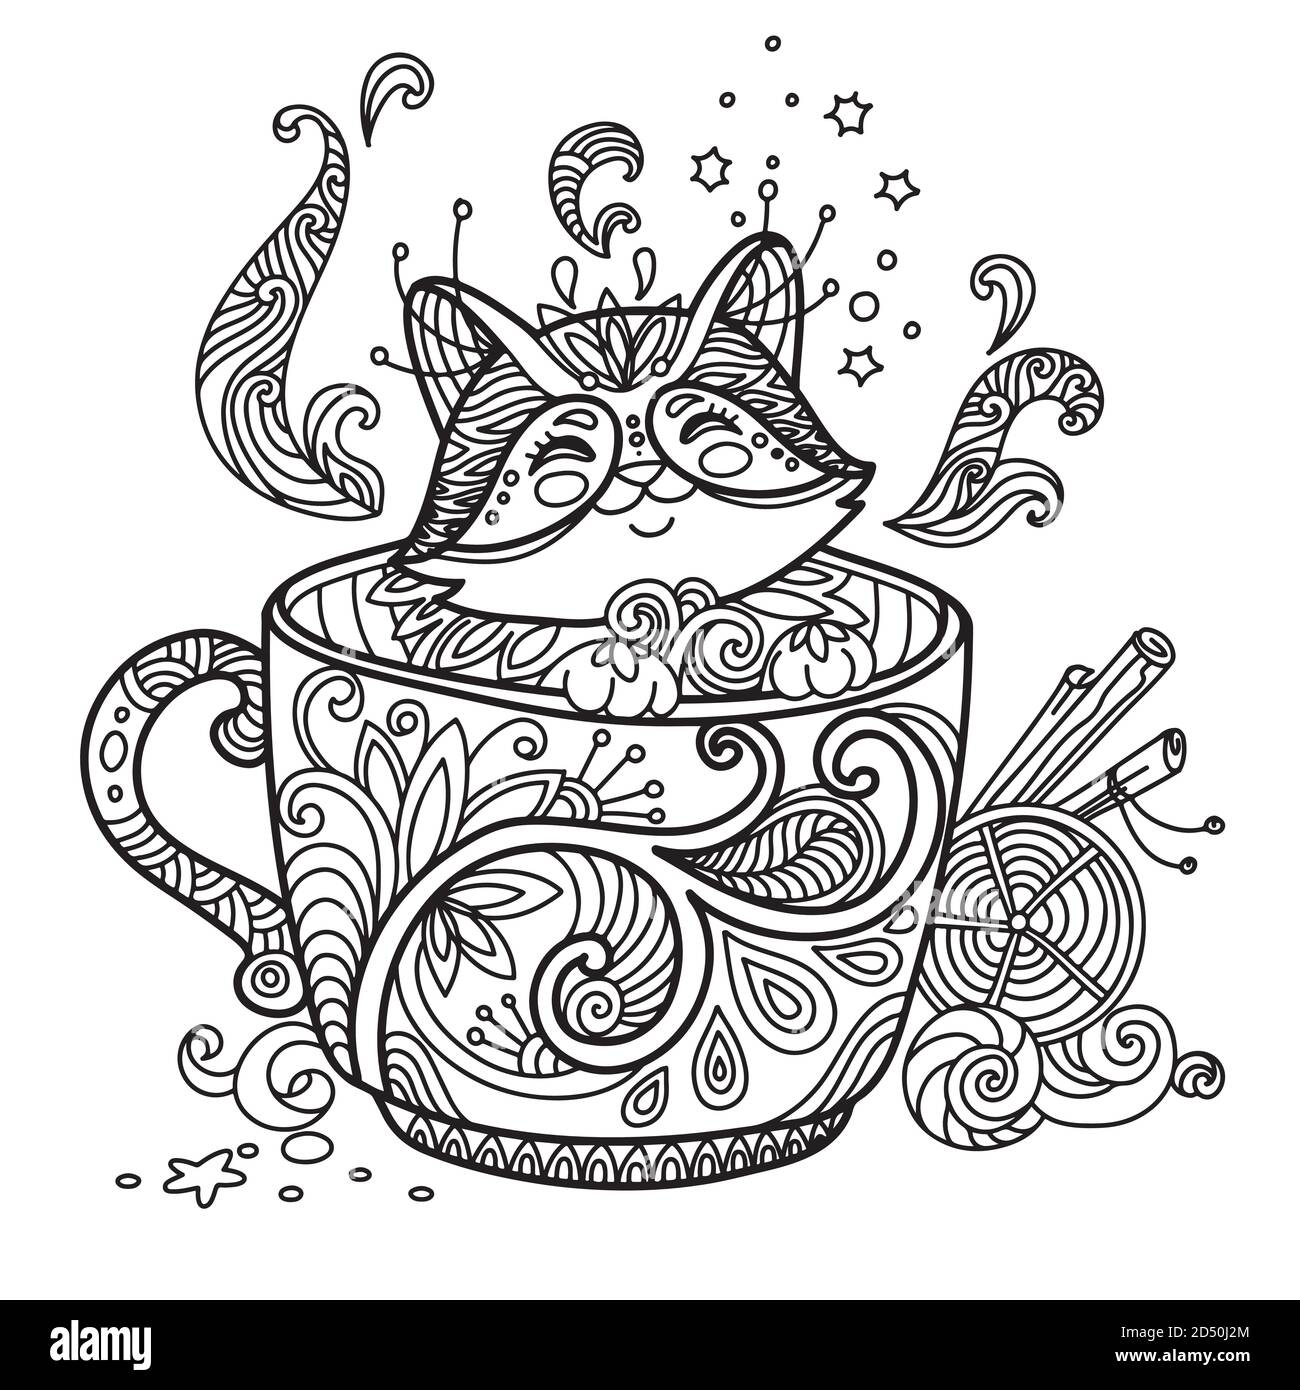 Curious cat in a cup coloring page